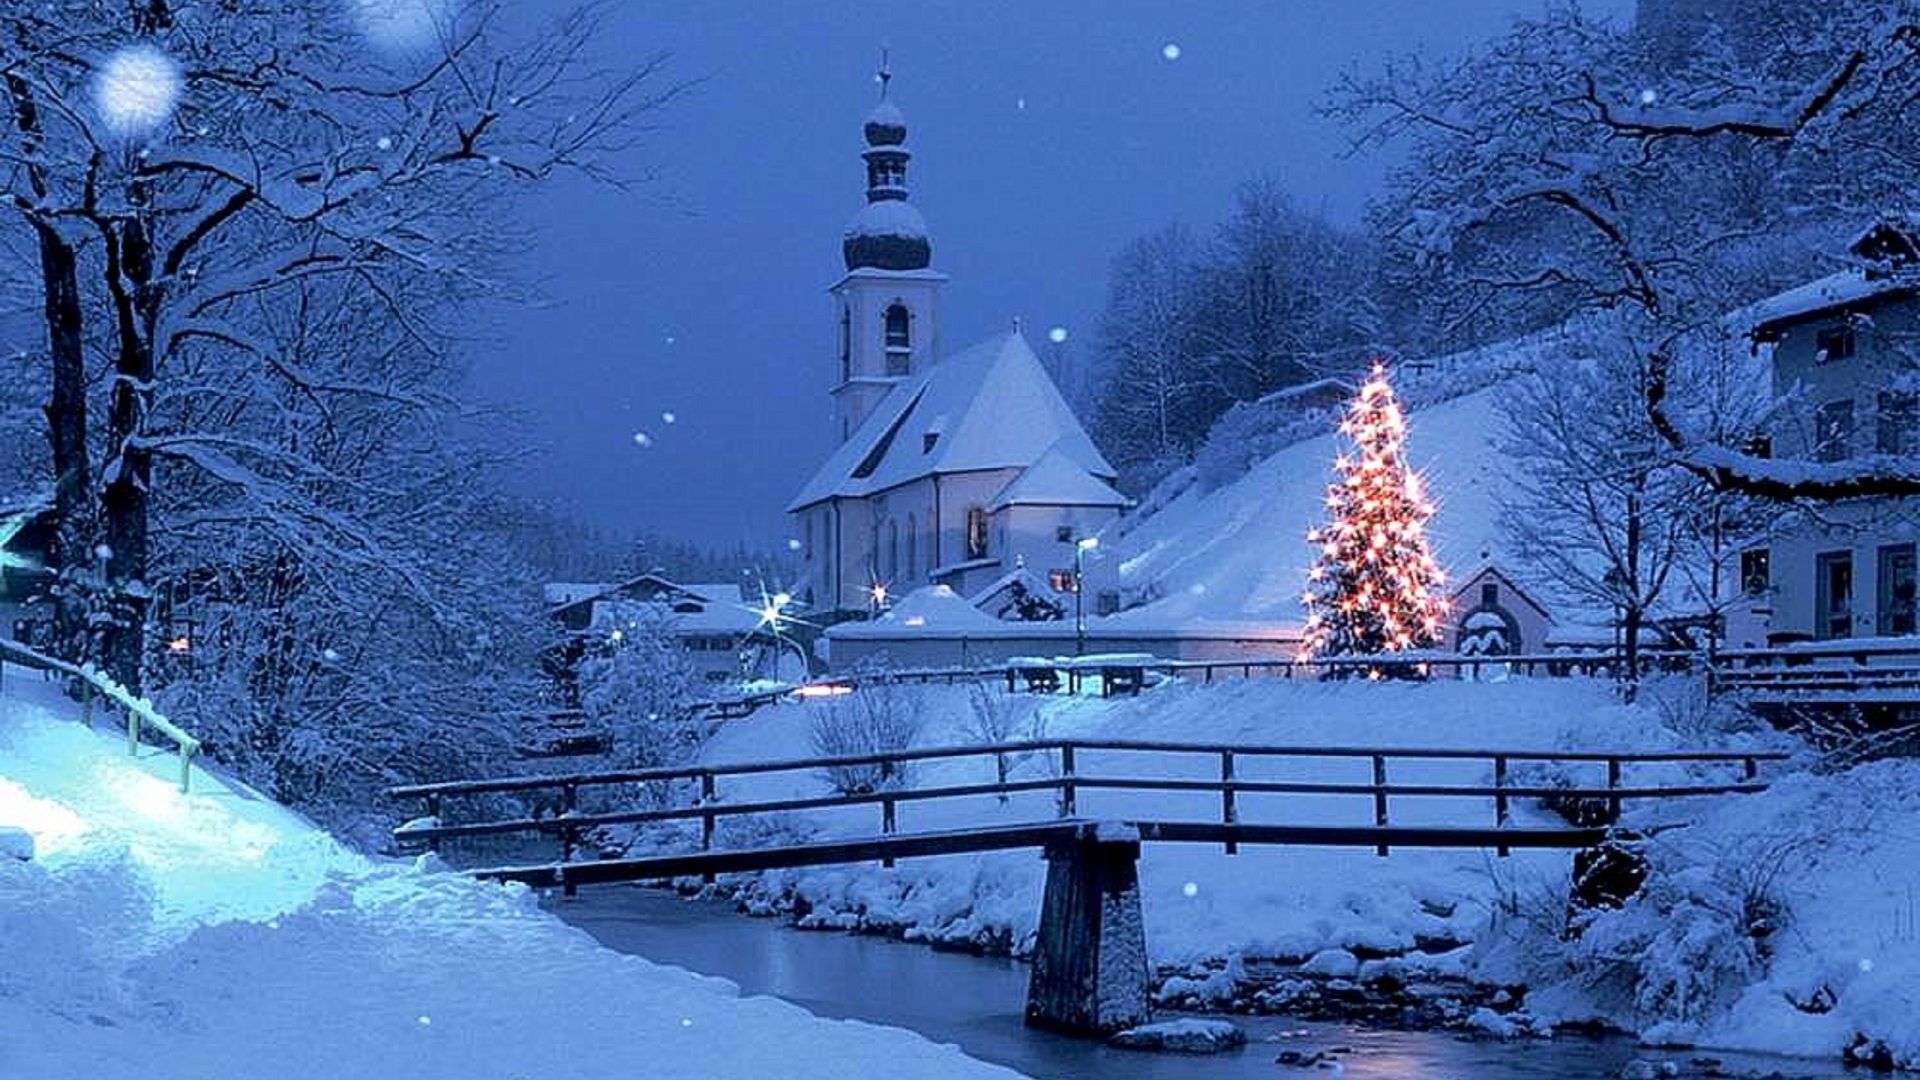 60 Churches in Winter HD Wallpapers   Download at WallpaperBro